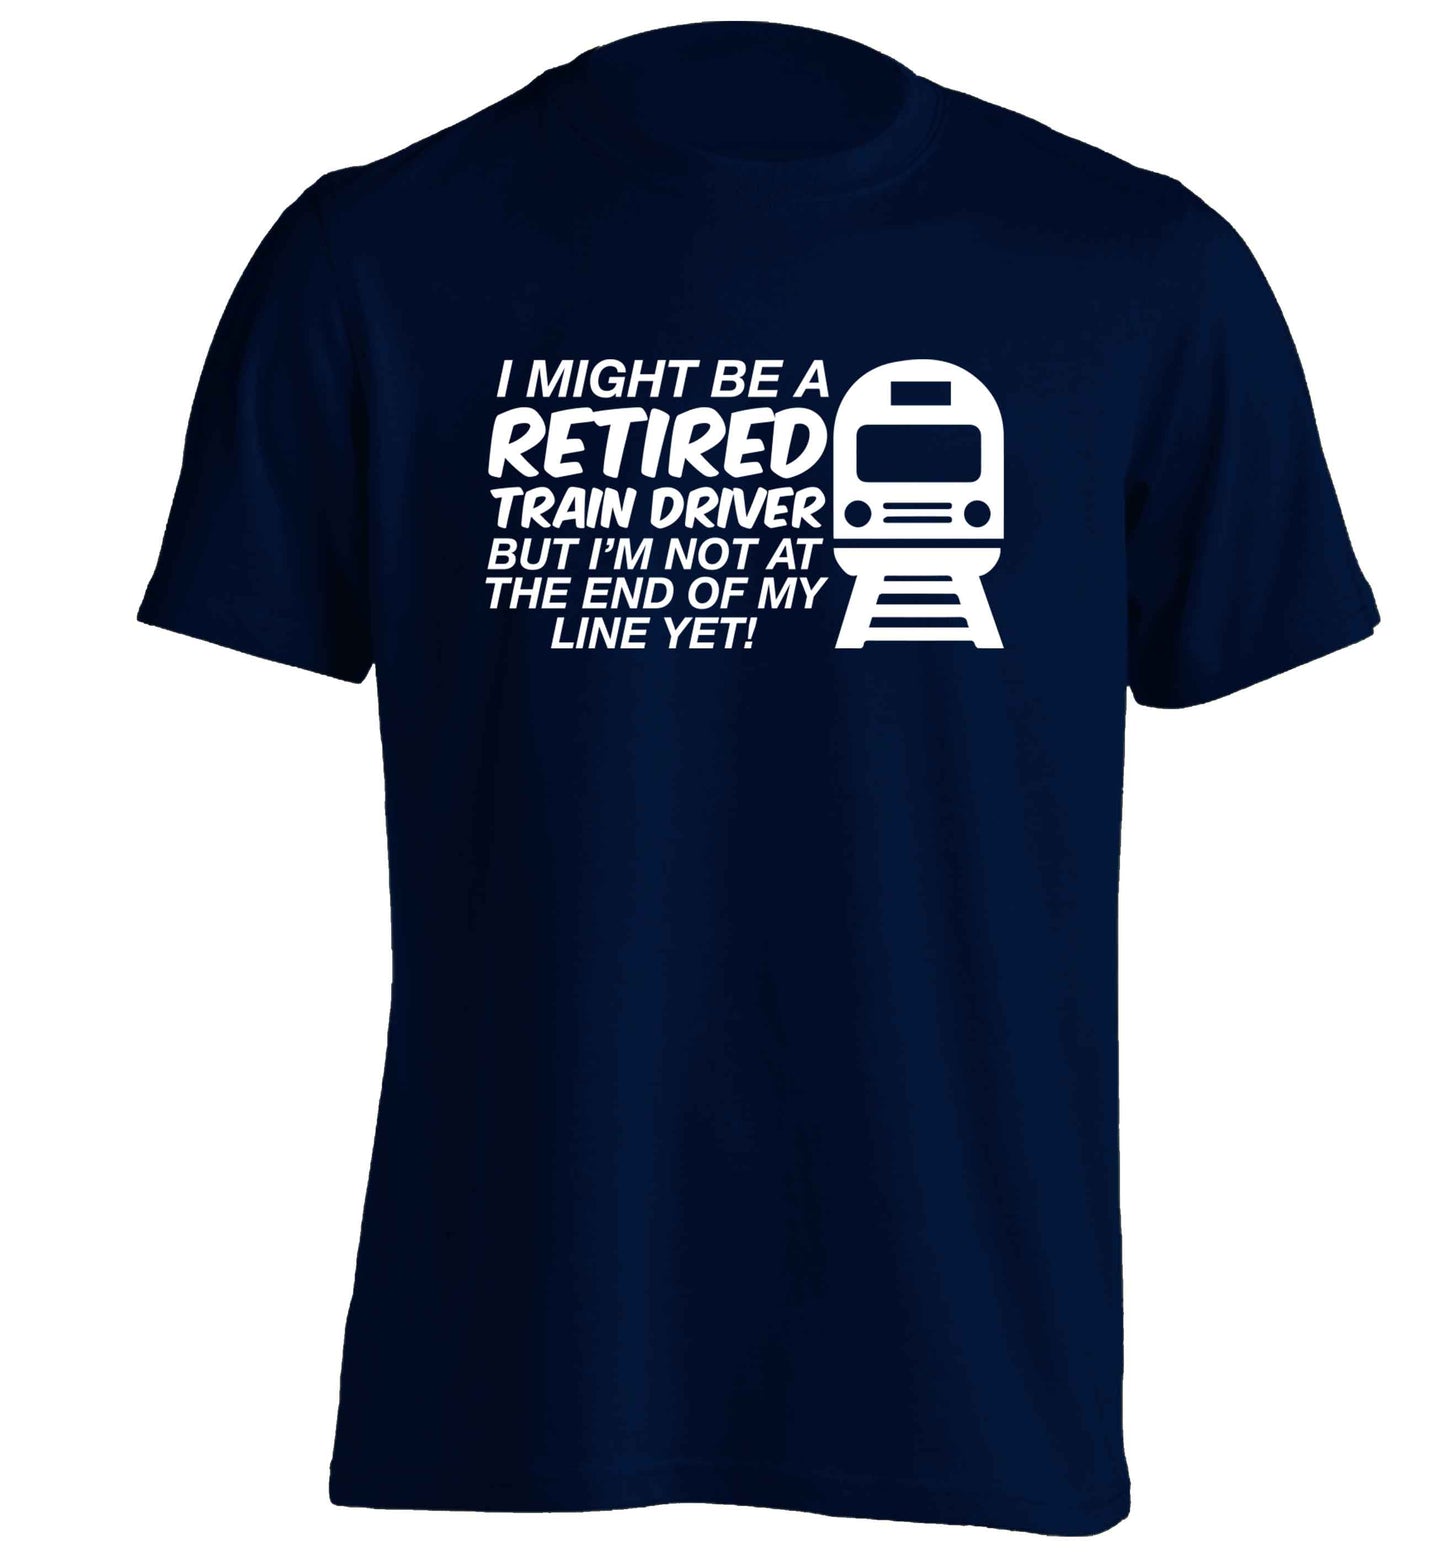 Retired train driver but I'm not at the end of my line yet adults unisex navy Tshirt 2XL